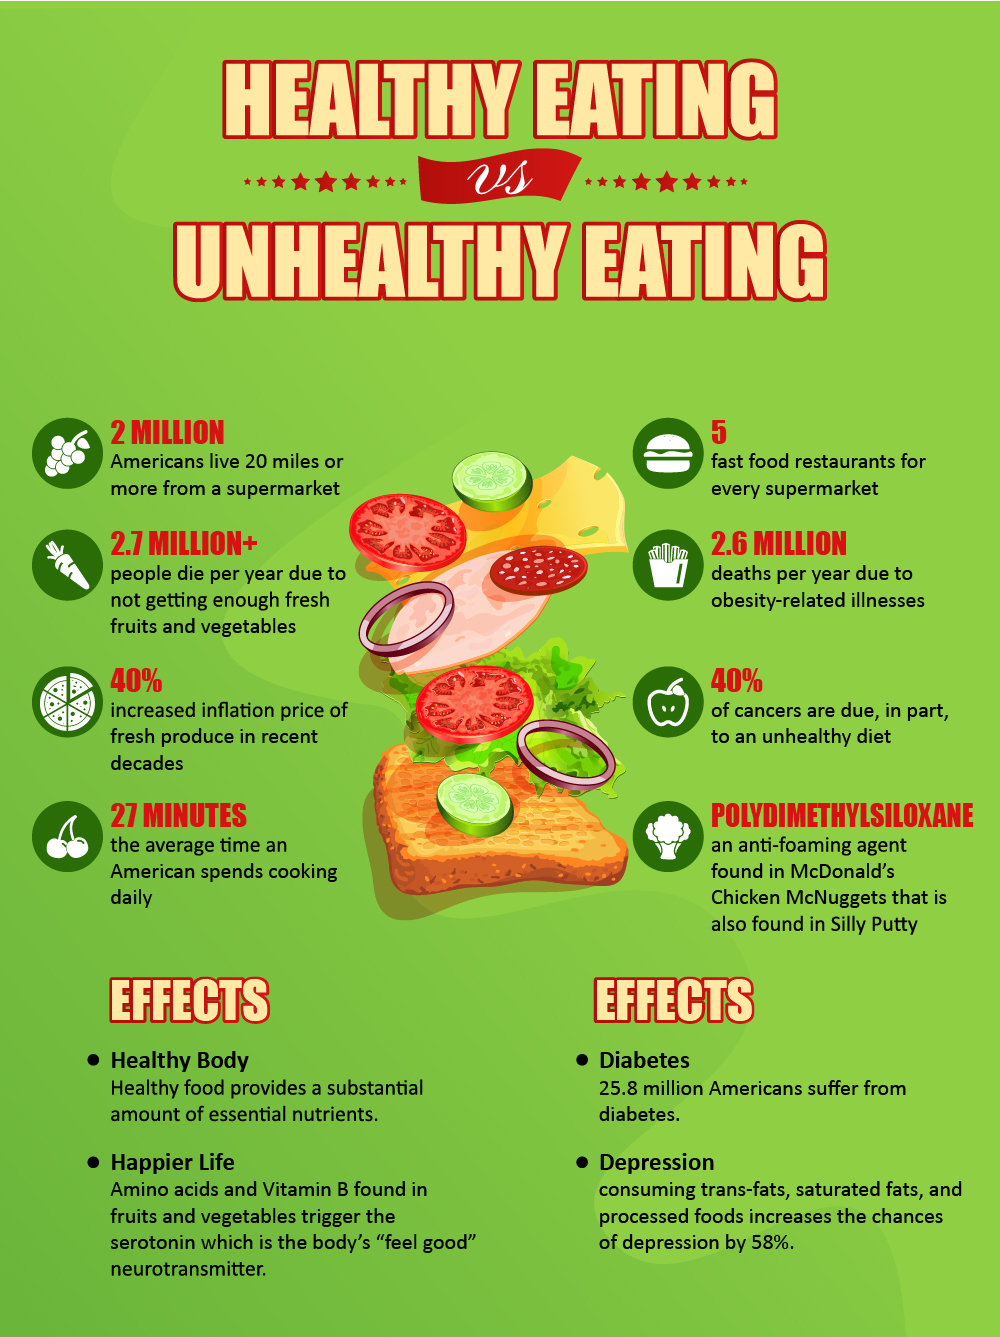 What Are The Benefits Of Eating Healthy Vs Eating Unhealthy Visually